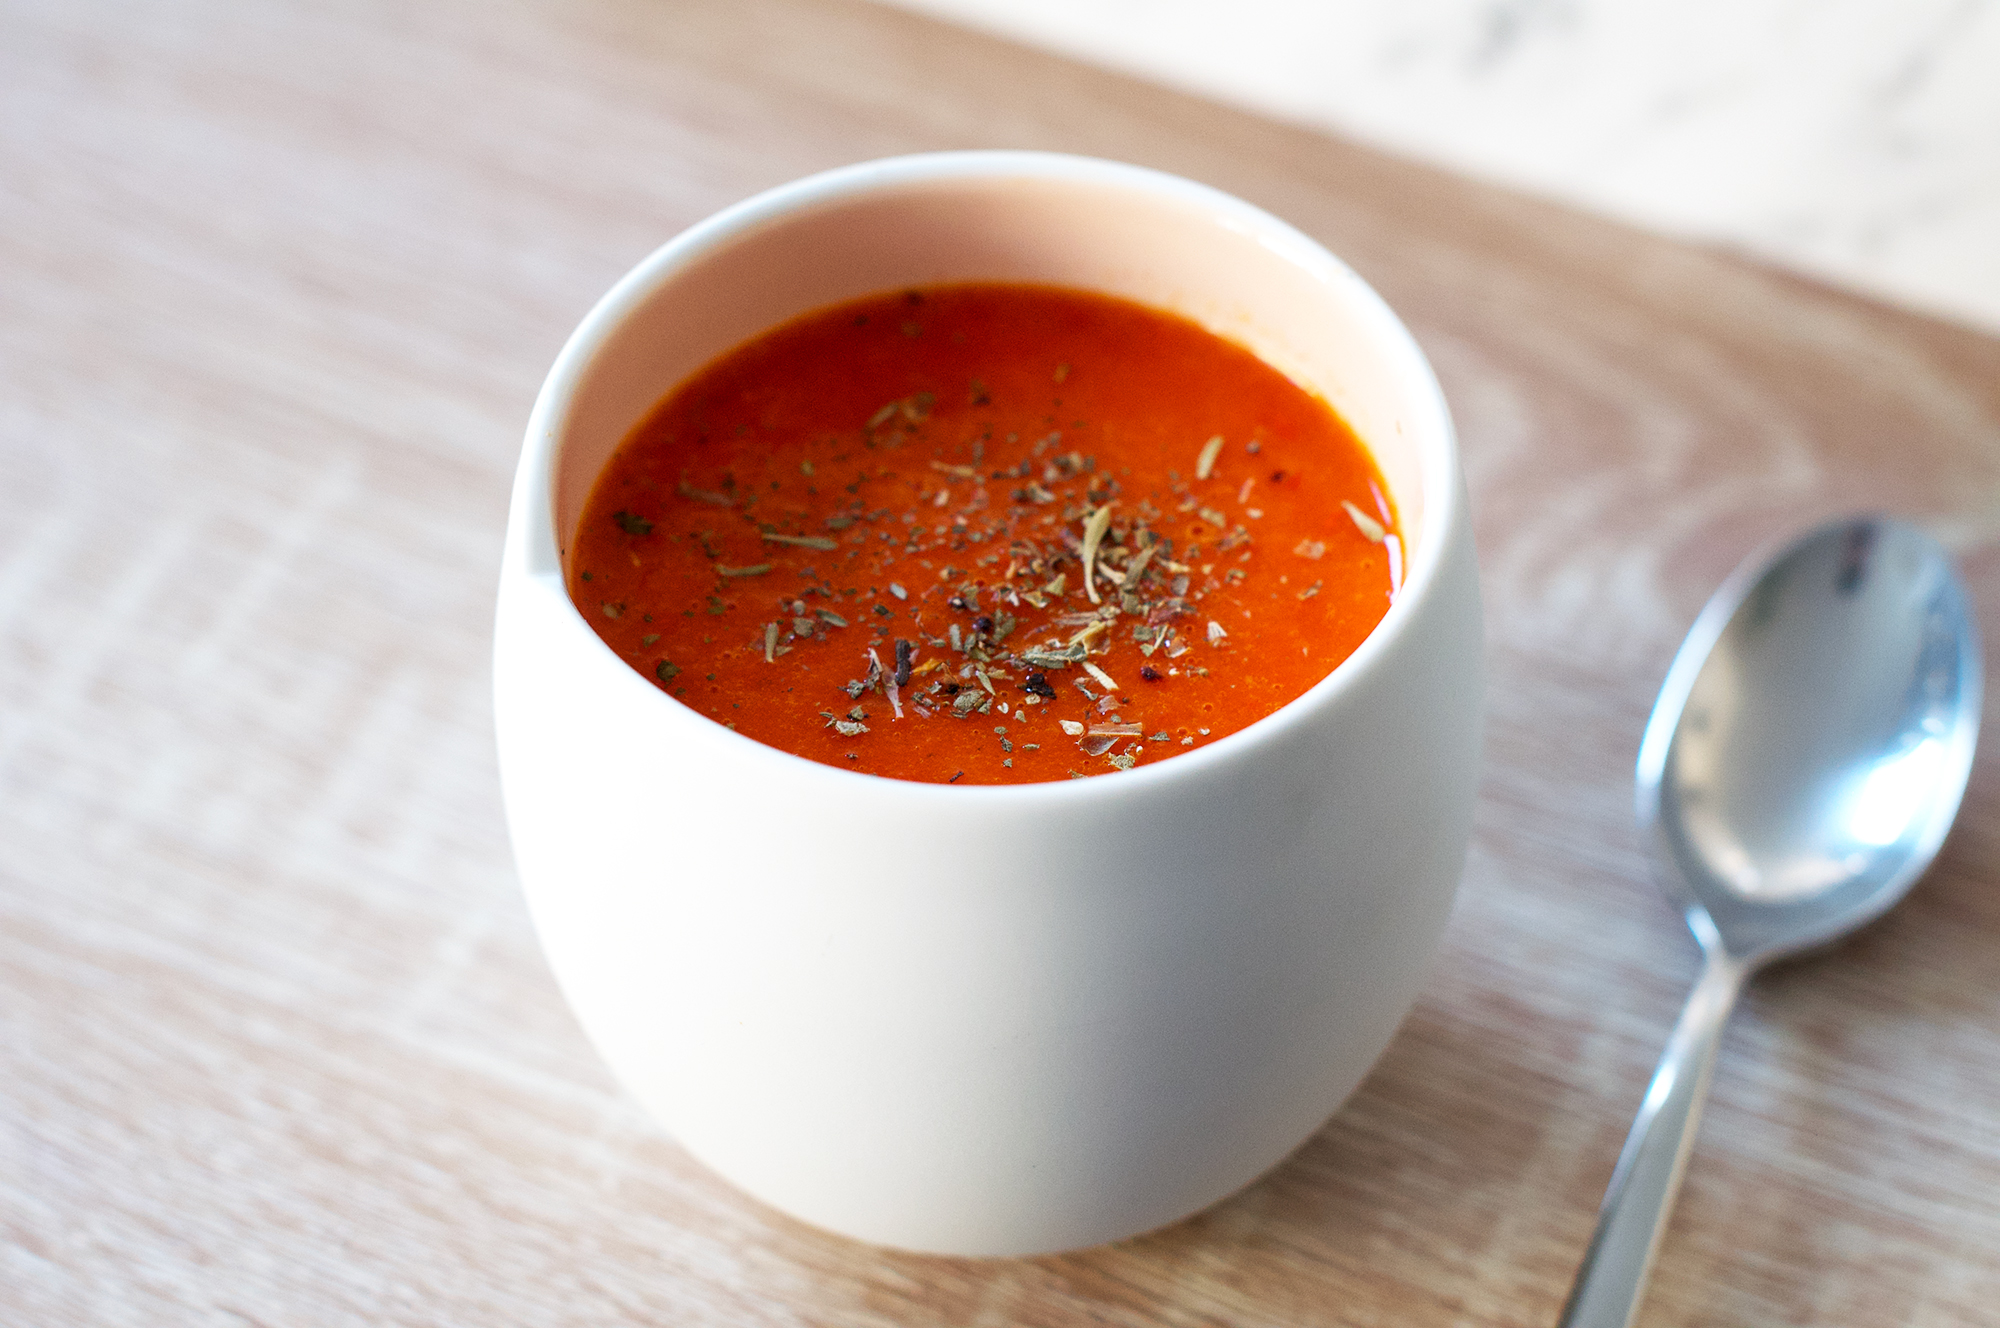 Recipe for red pepper and tomato soup